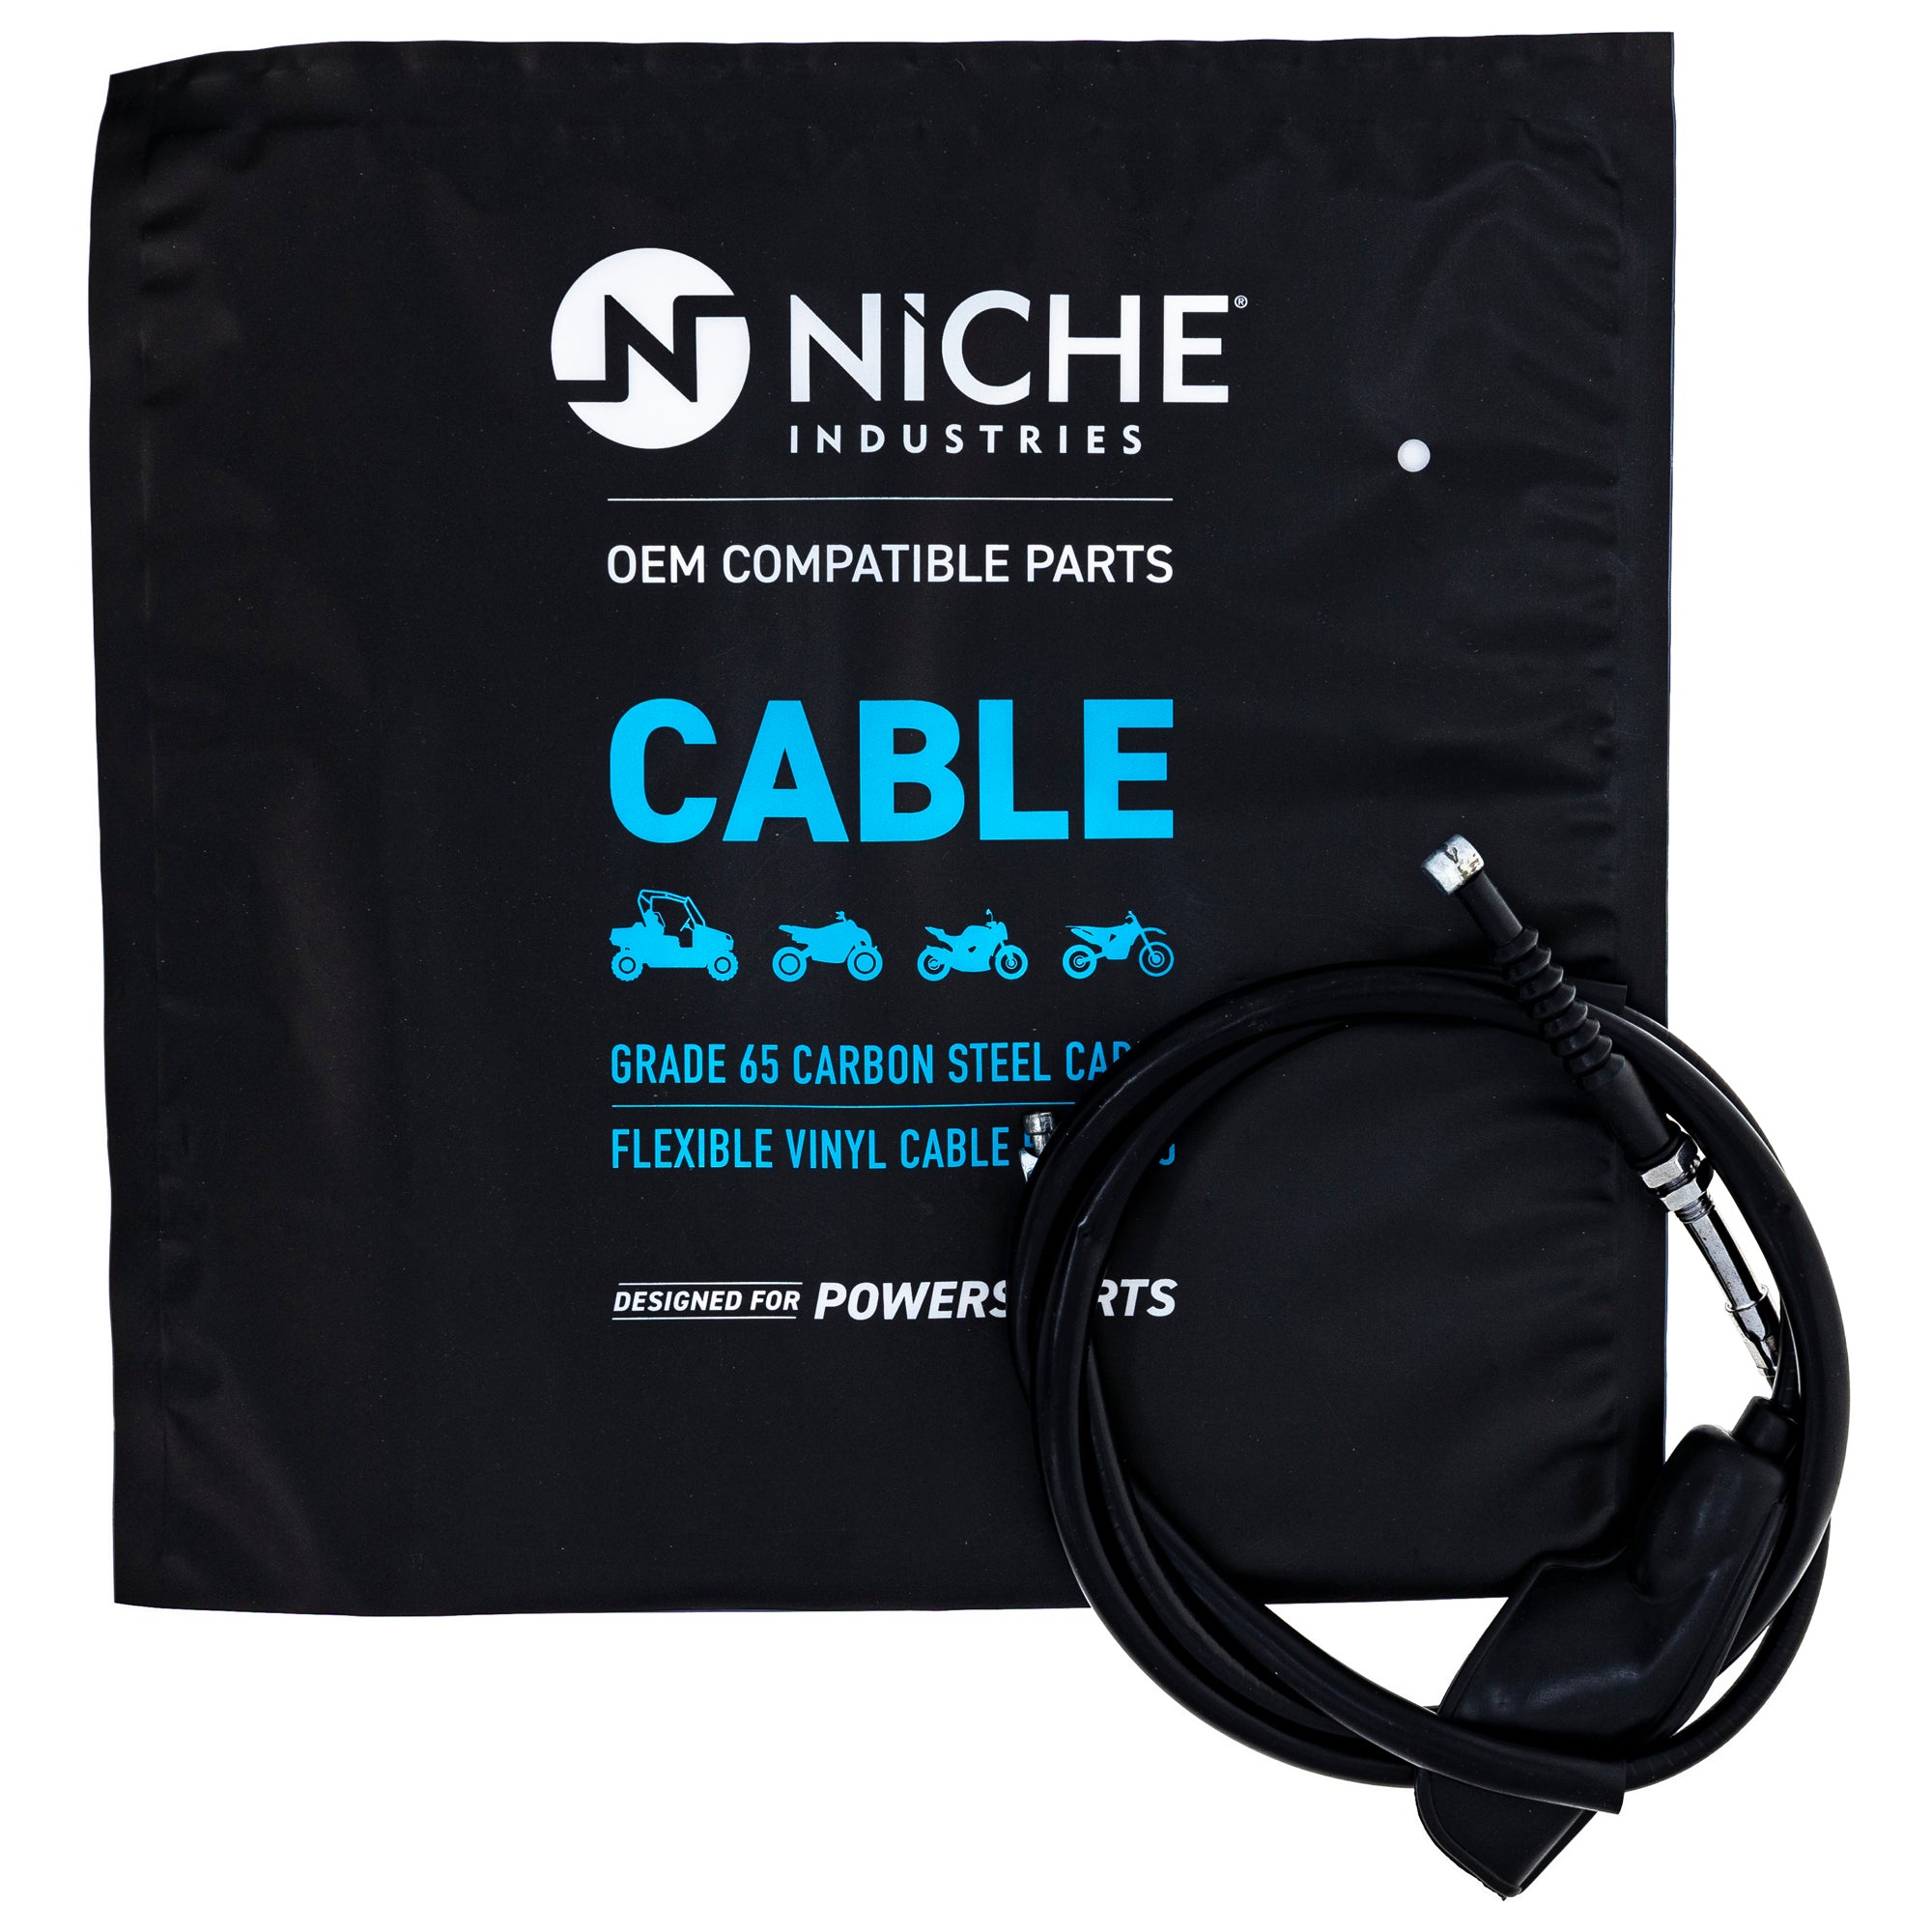 NICHE 519-CCB2444L Front Brake Cable for zOTHER DT175 DT125